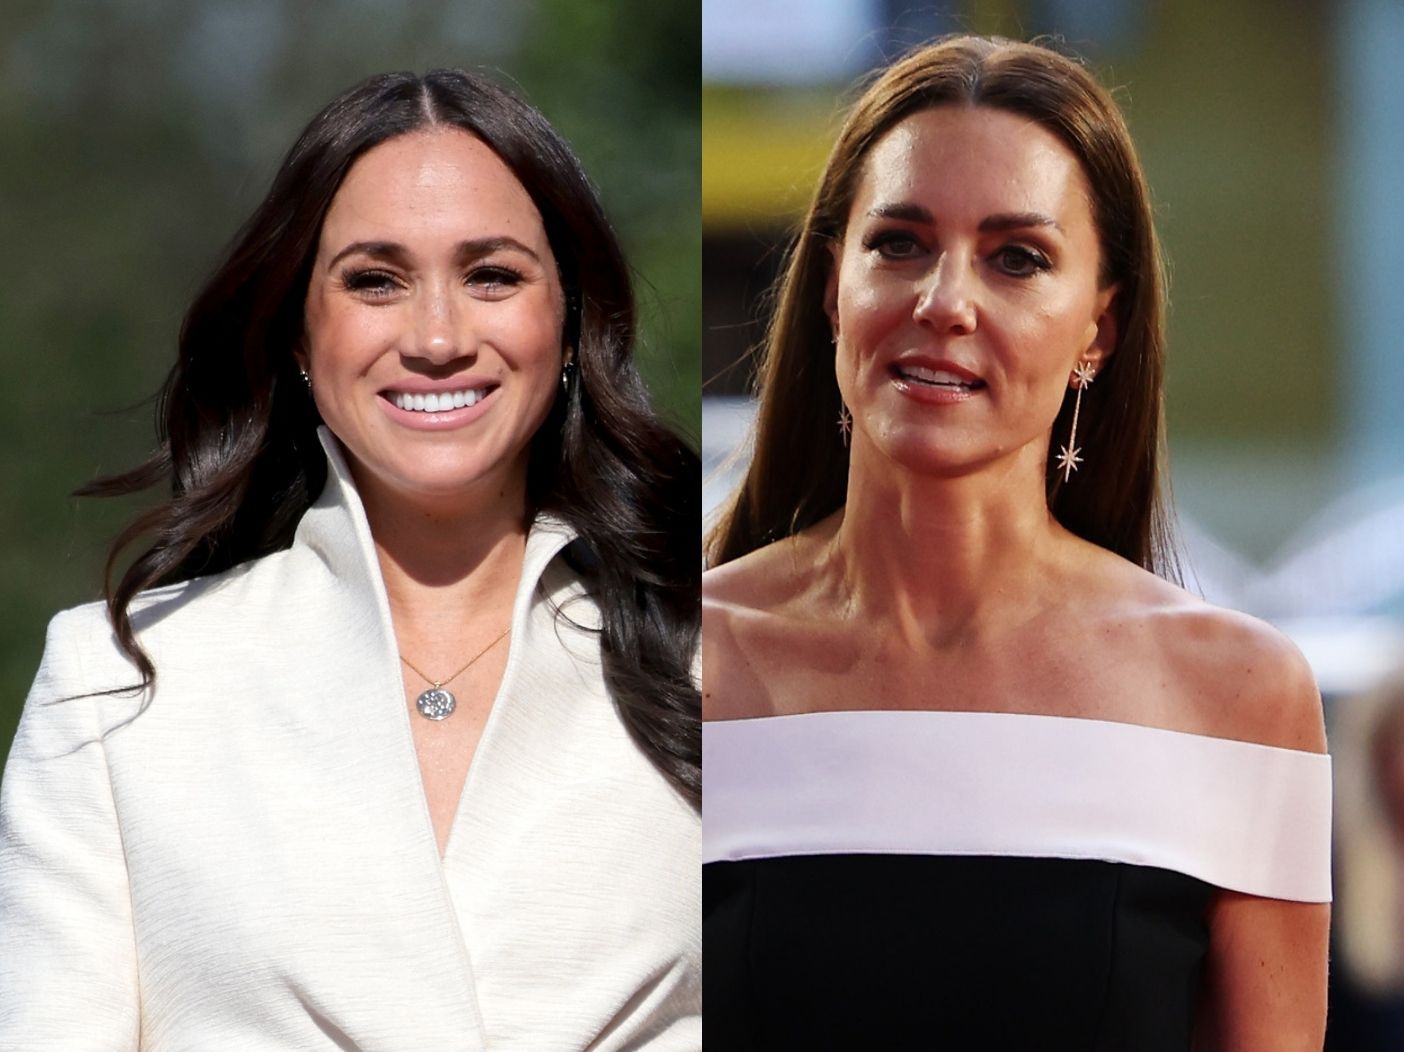 Palace Allegedly Bracing For Meghan Markle To Defy Longstanding Royal Tradition In Clash With Kate Middleton, Gossip Claims